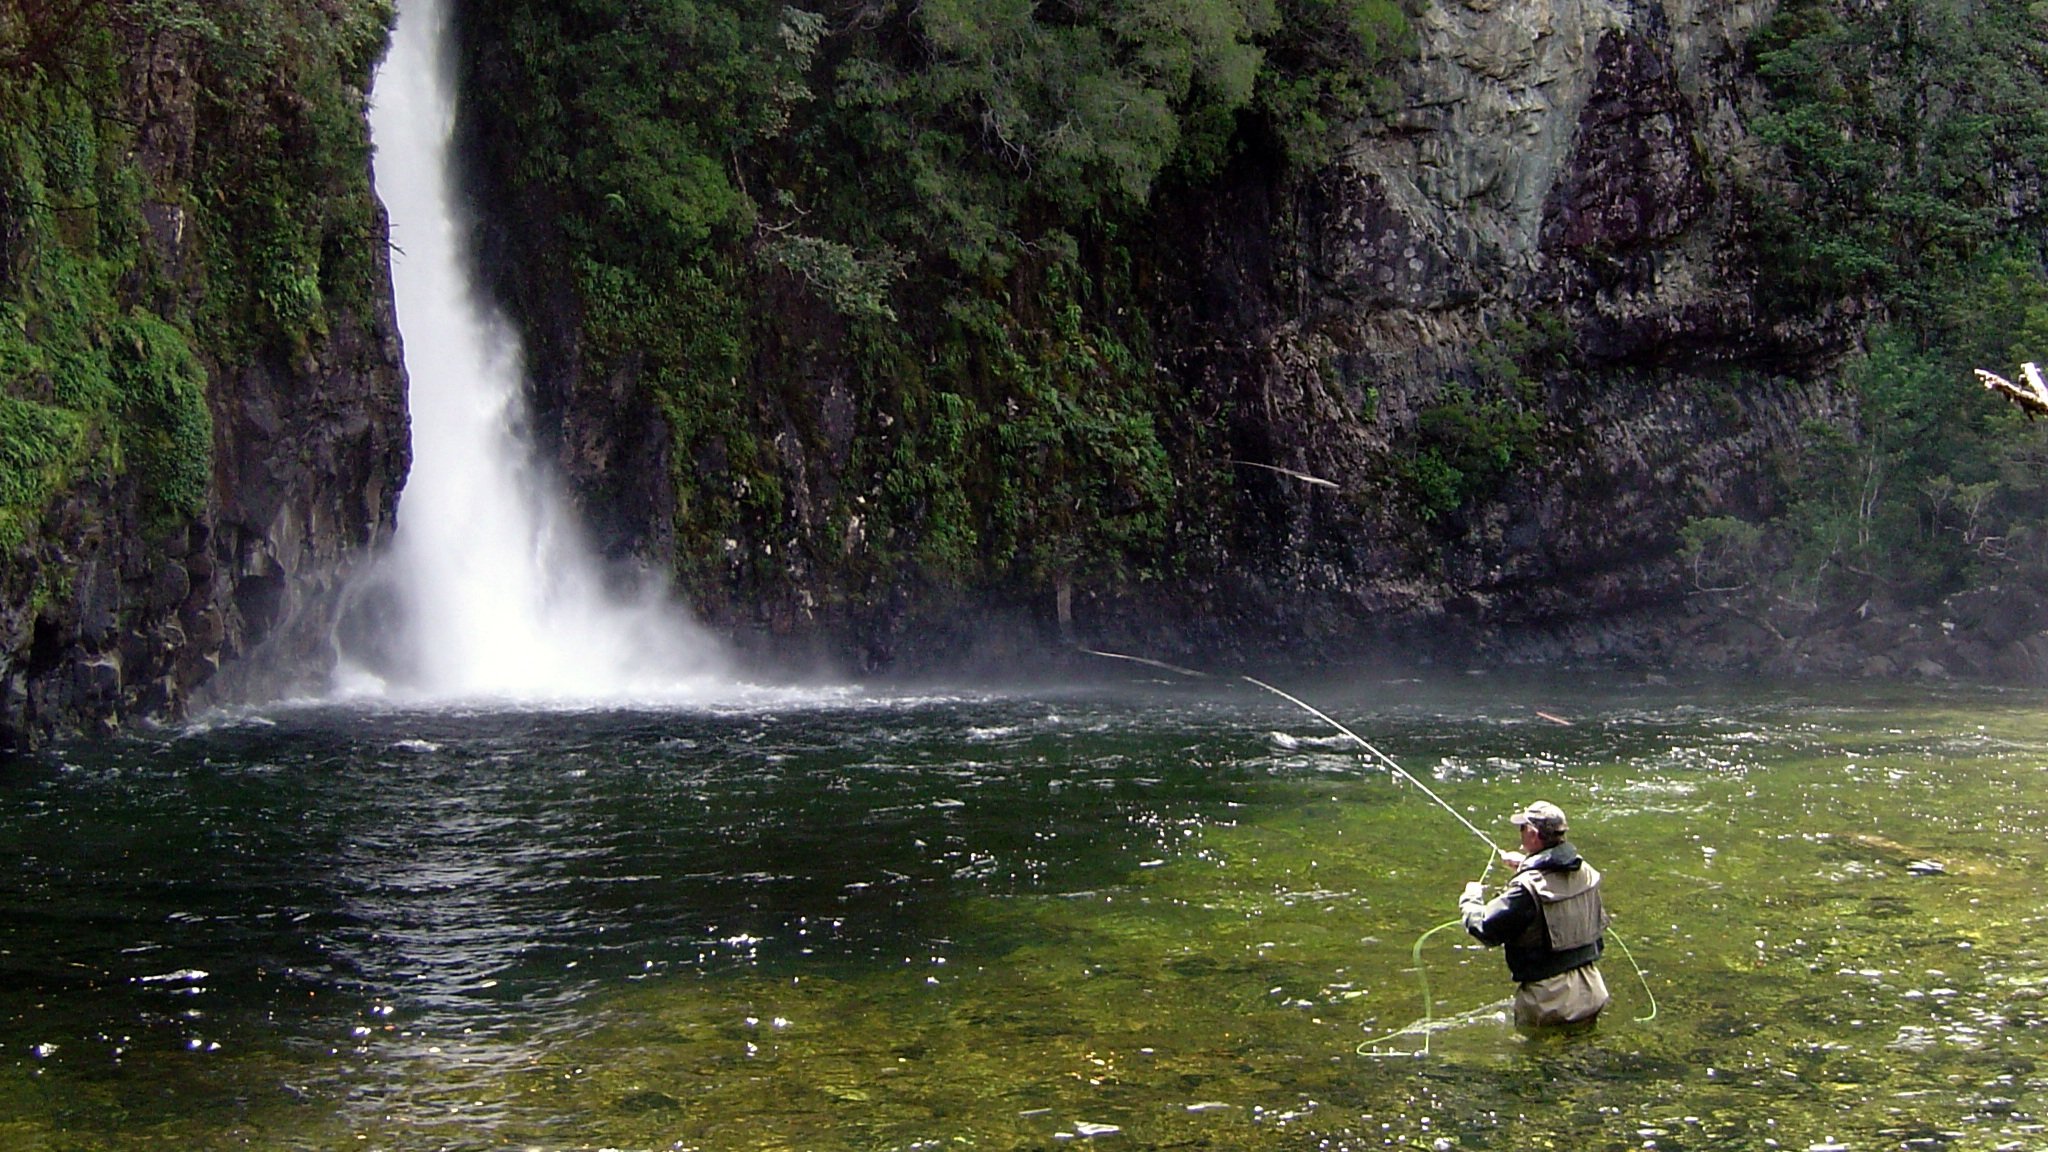 Fisherman+with+waterfall+in+background.jpg